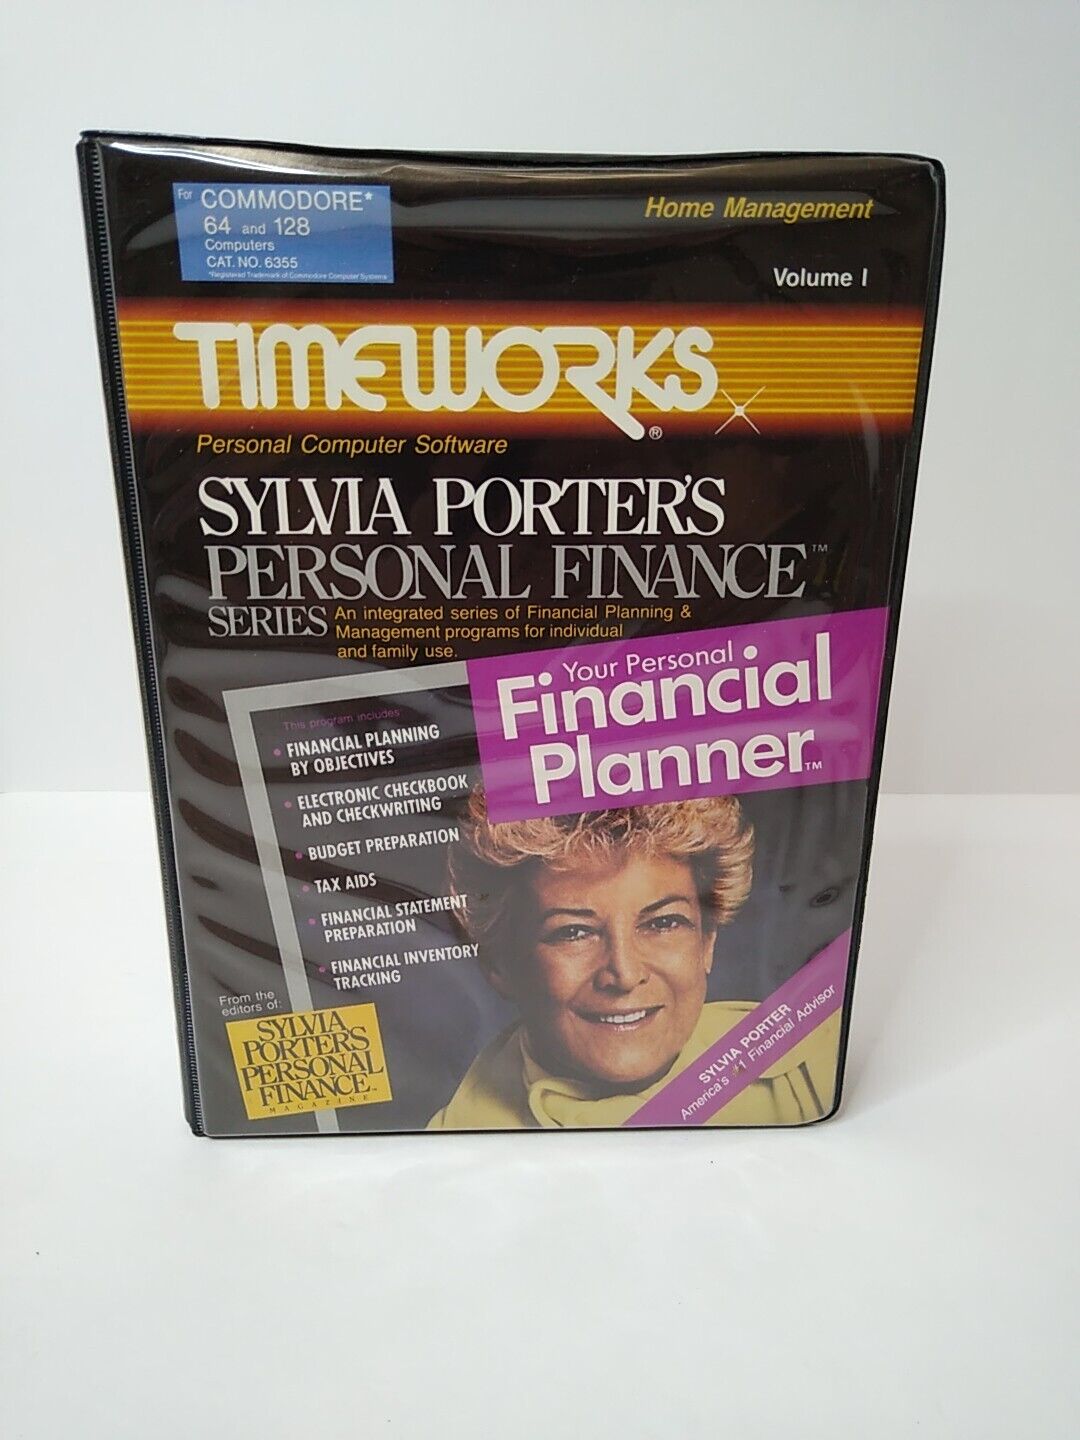 VTG Timeworks Sylvia Porter's Personal Finance Vol #1-For Commodore 64 And 128 